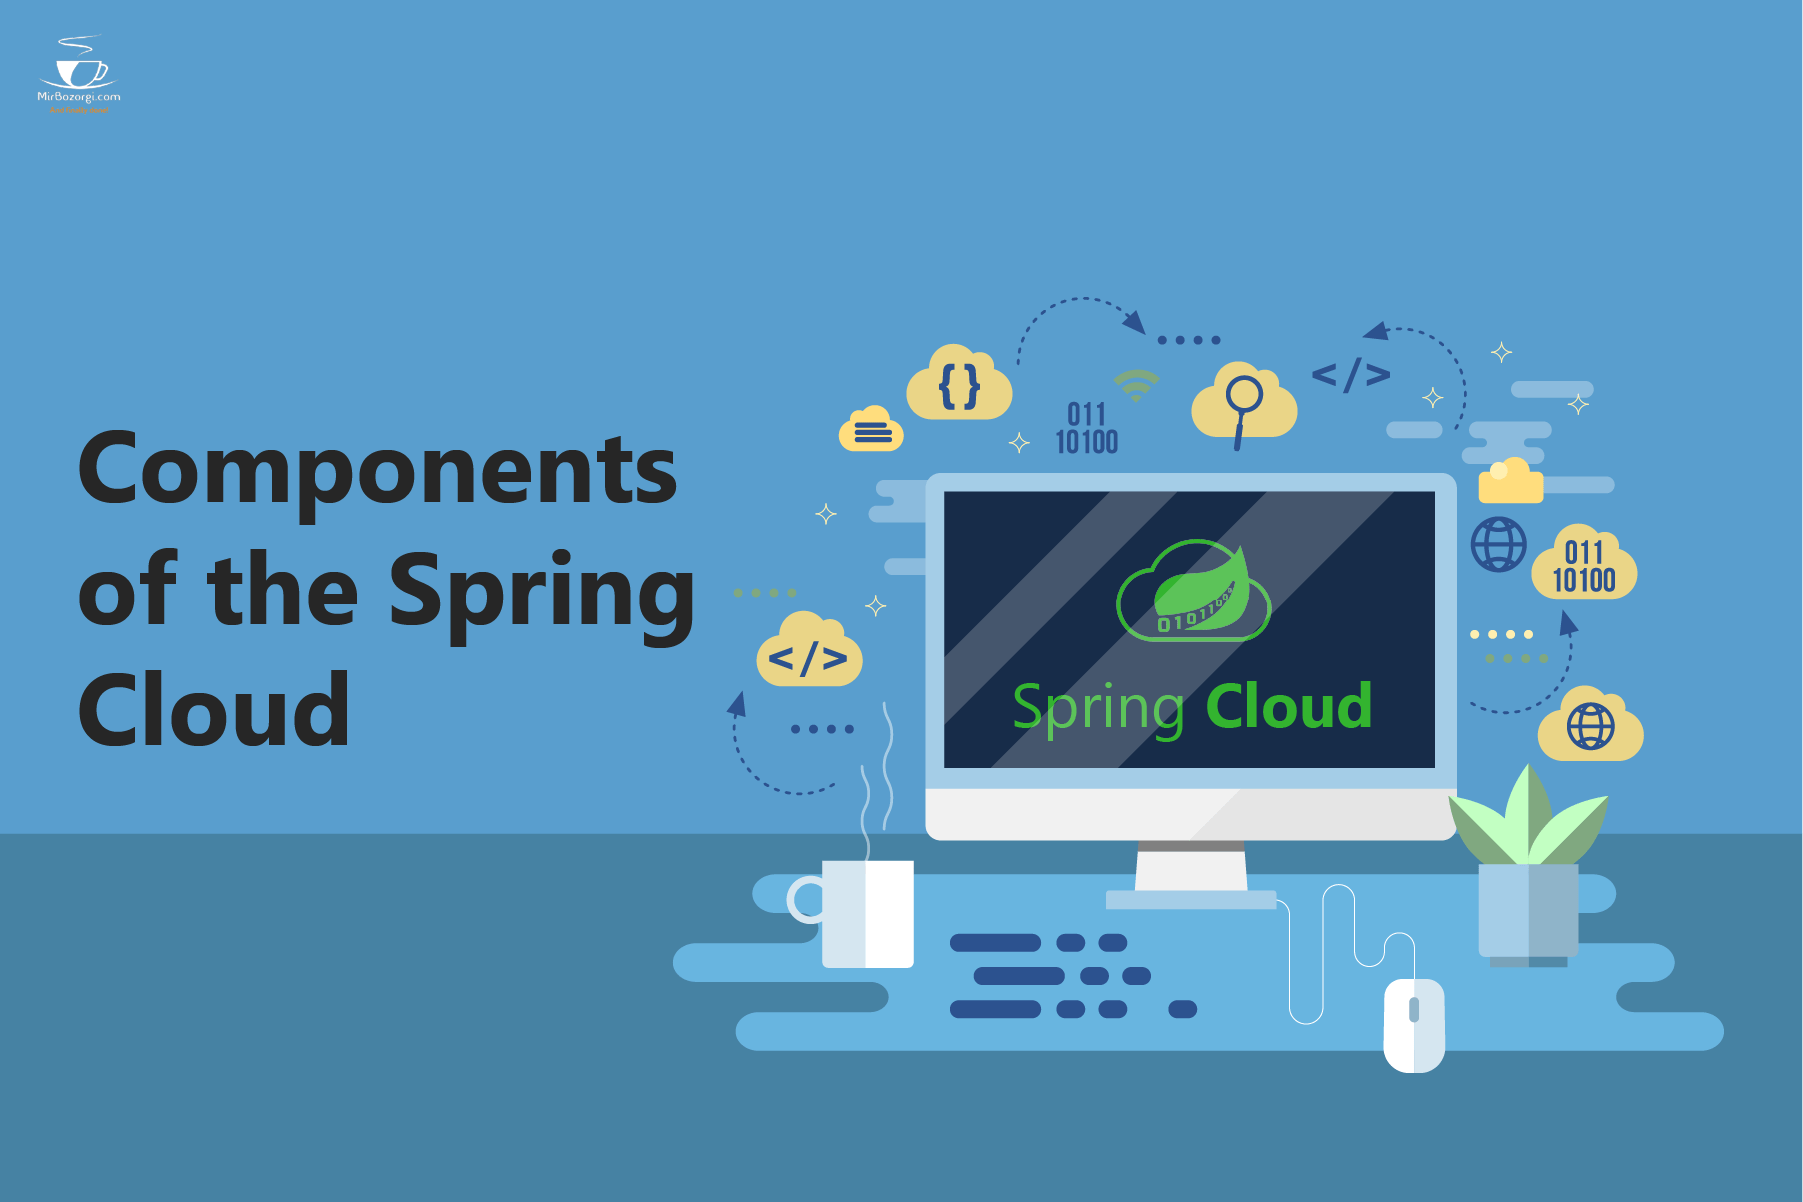 Components of the Spring Cloud